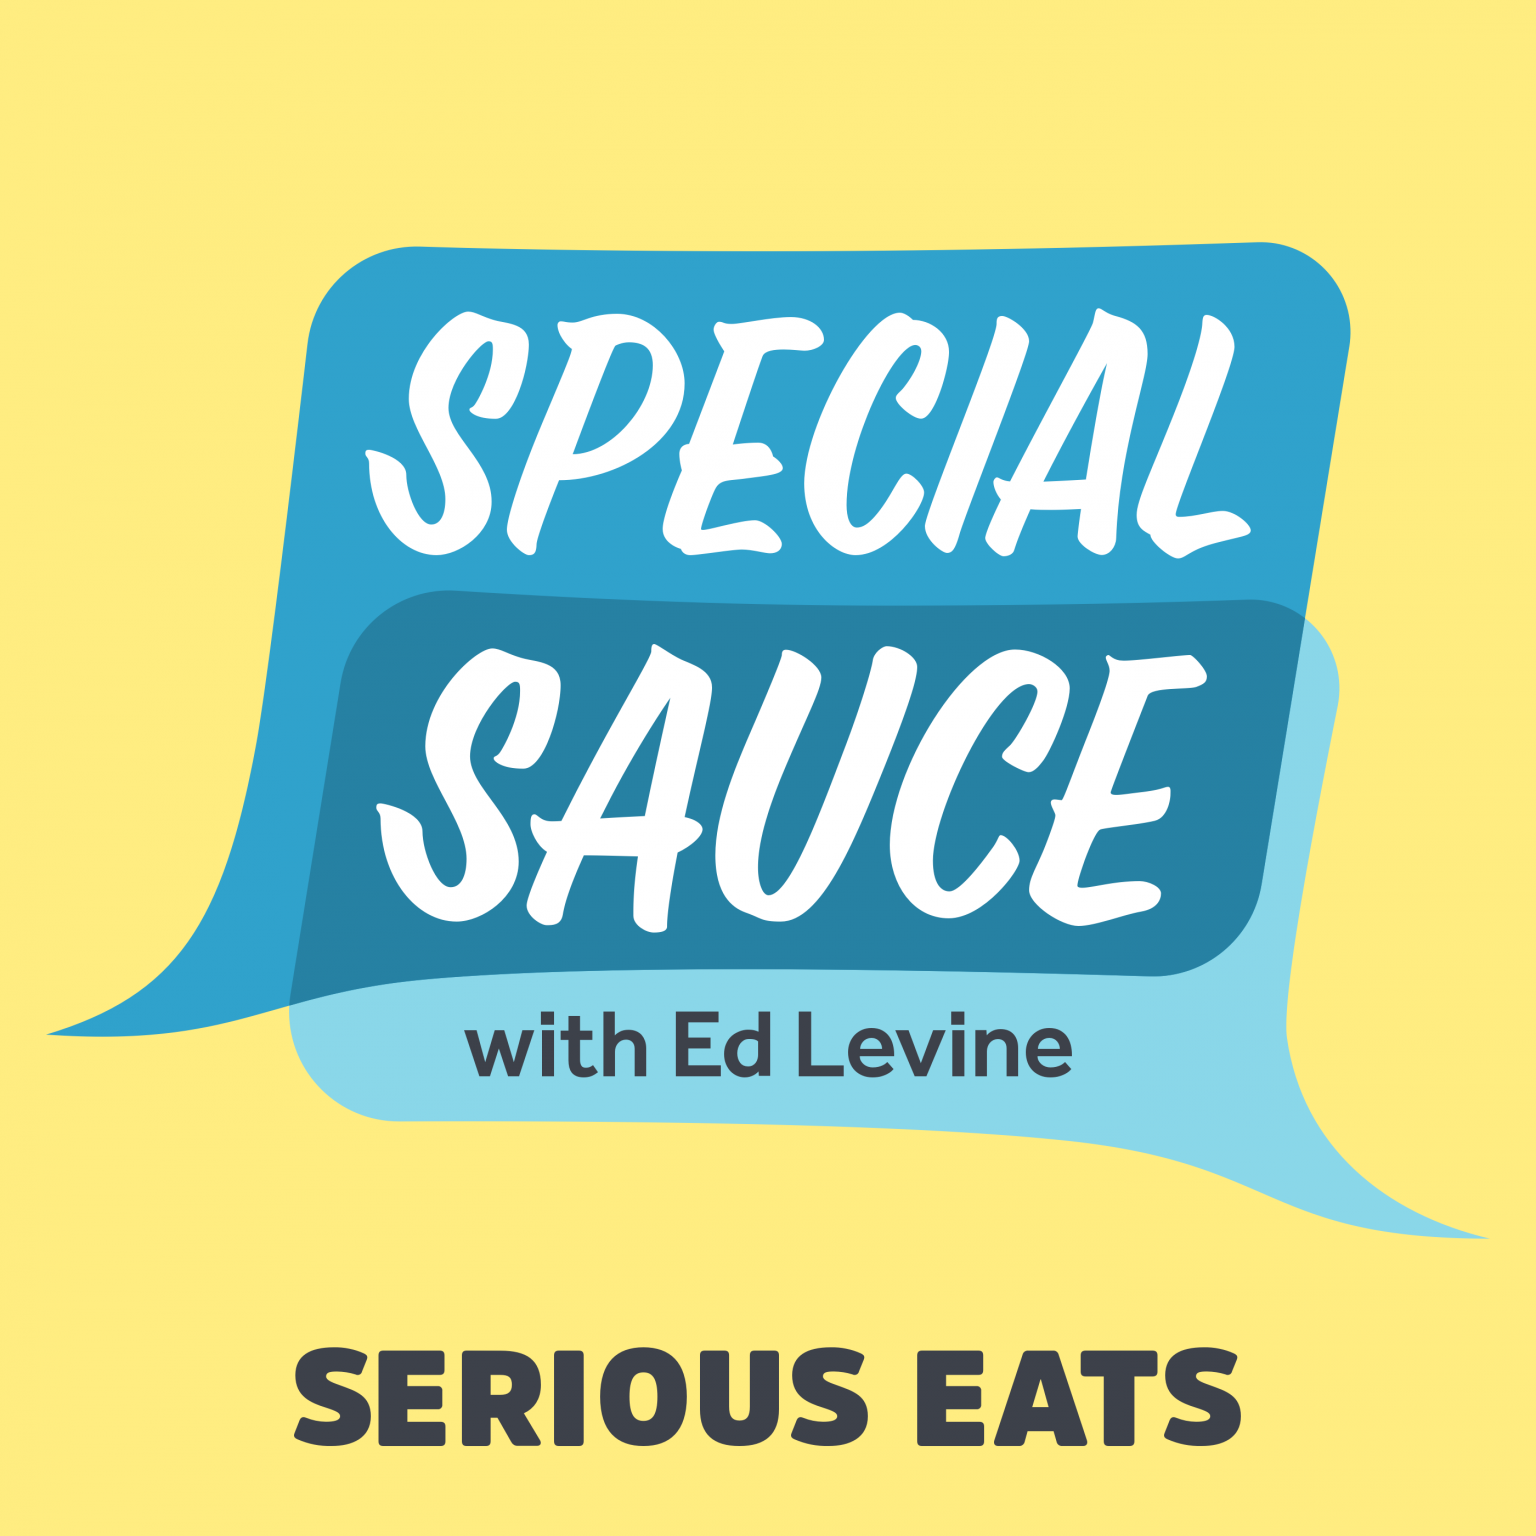 Special Sauce: Introducing Special Sauce 2.0, with guest Nick Morgenstern [1/2]